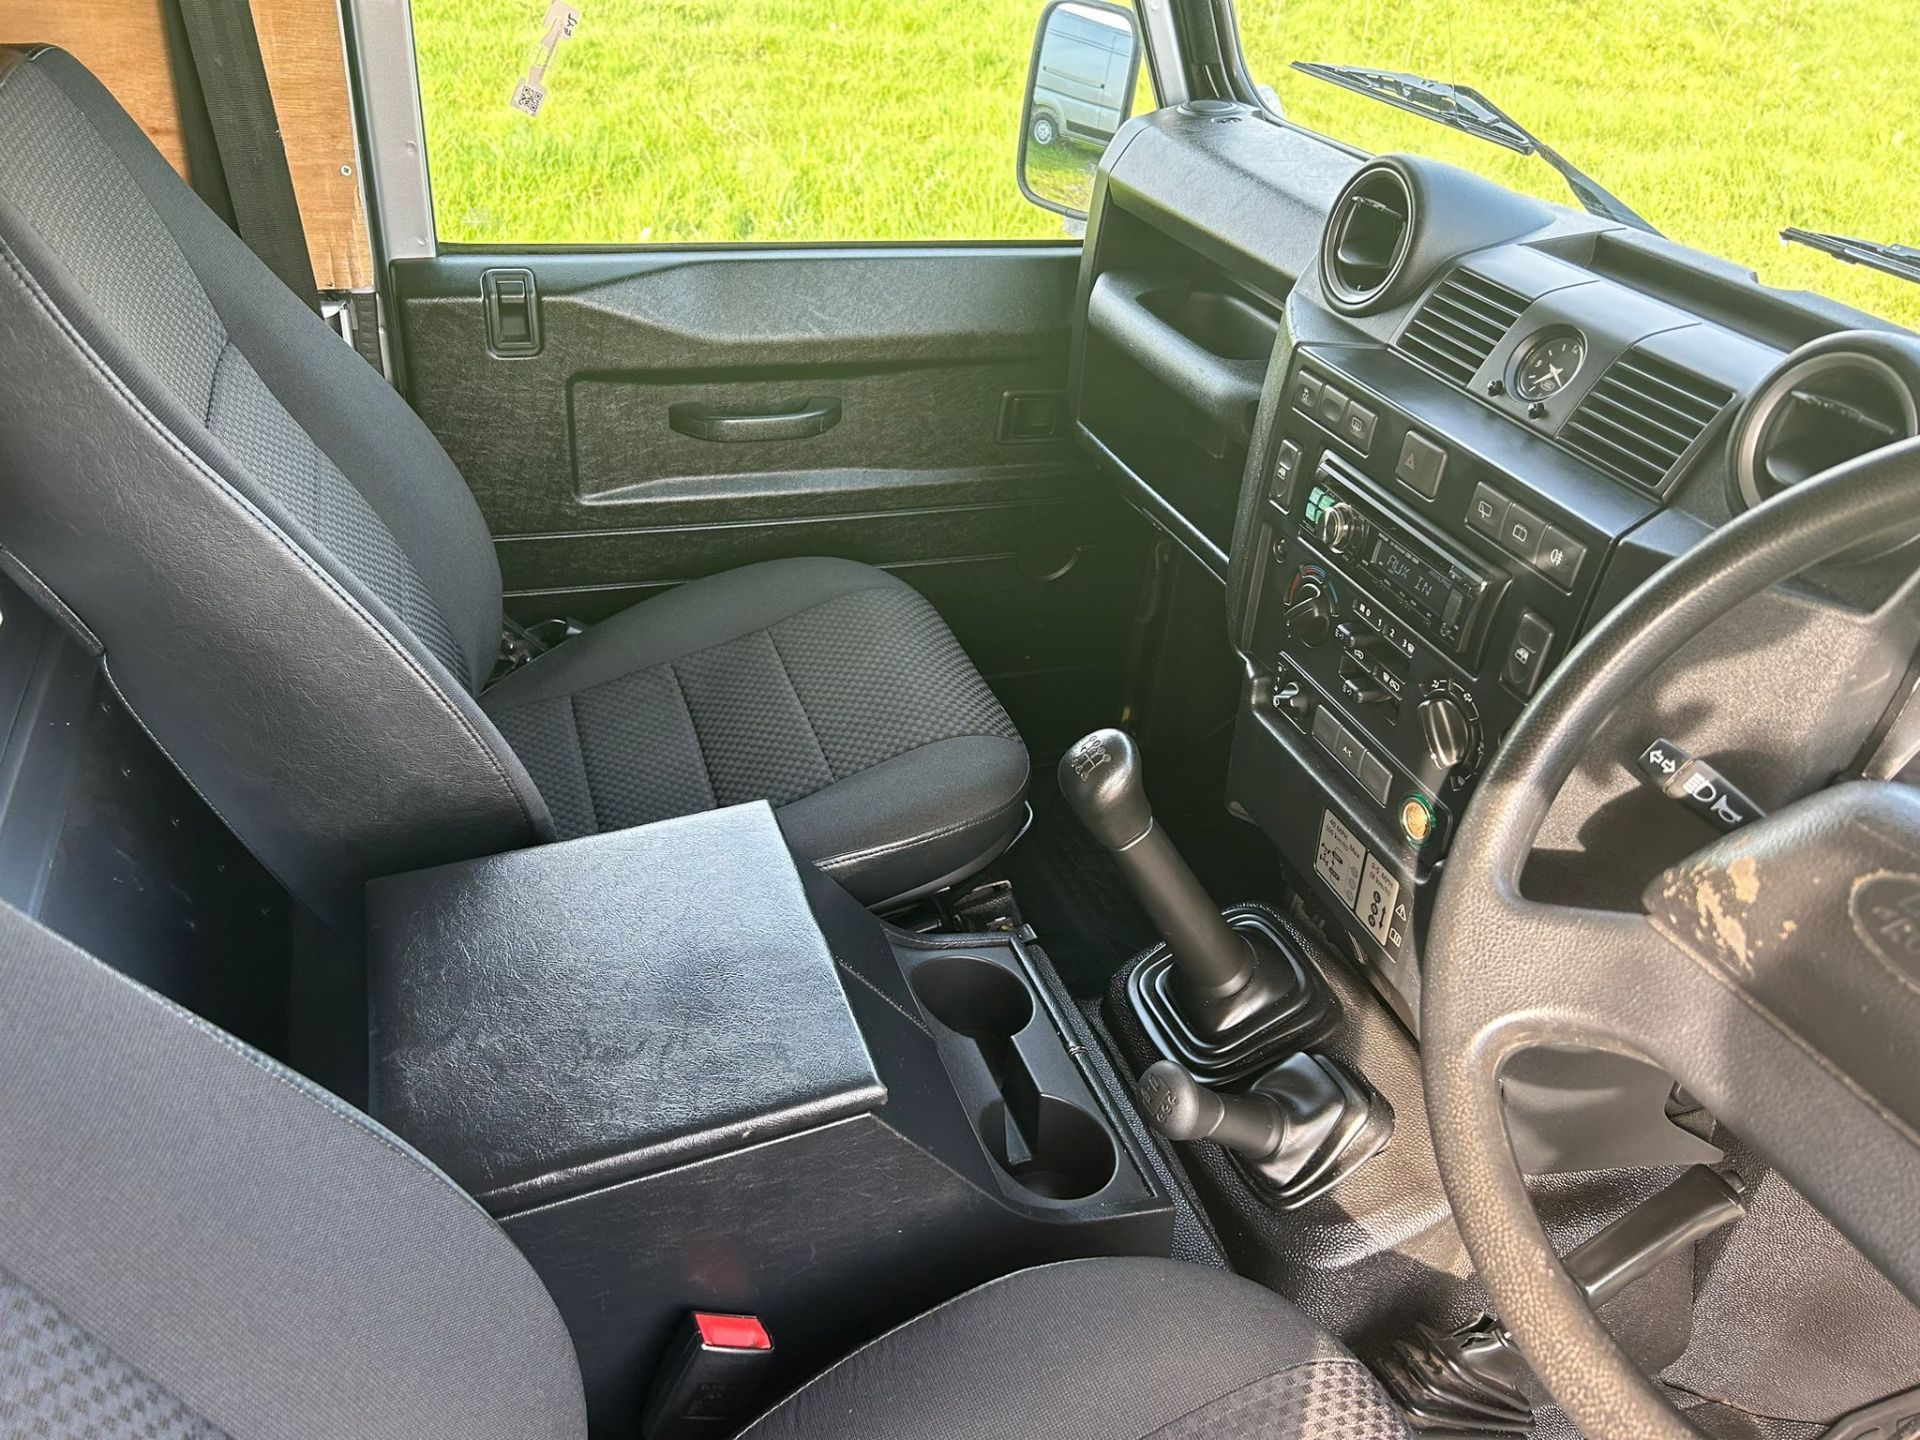 2016 LAND ROVER DEFENDER 110 UTILITY HARDTOP 2.2 TDCI SILVER 54K 1 OWNER AIR CON (NEW IMAGES ADDED) - Image 10 of 13